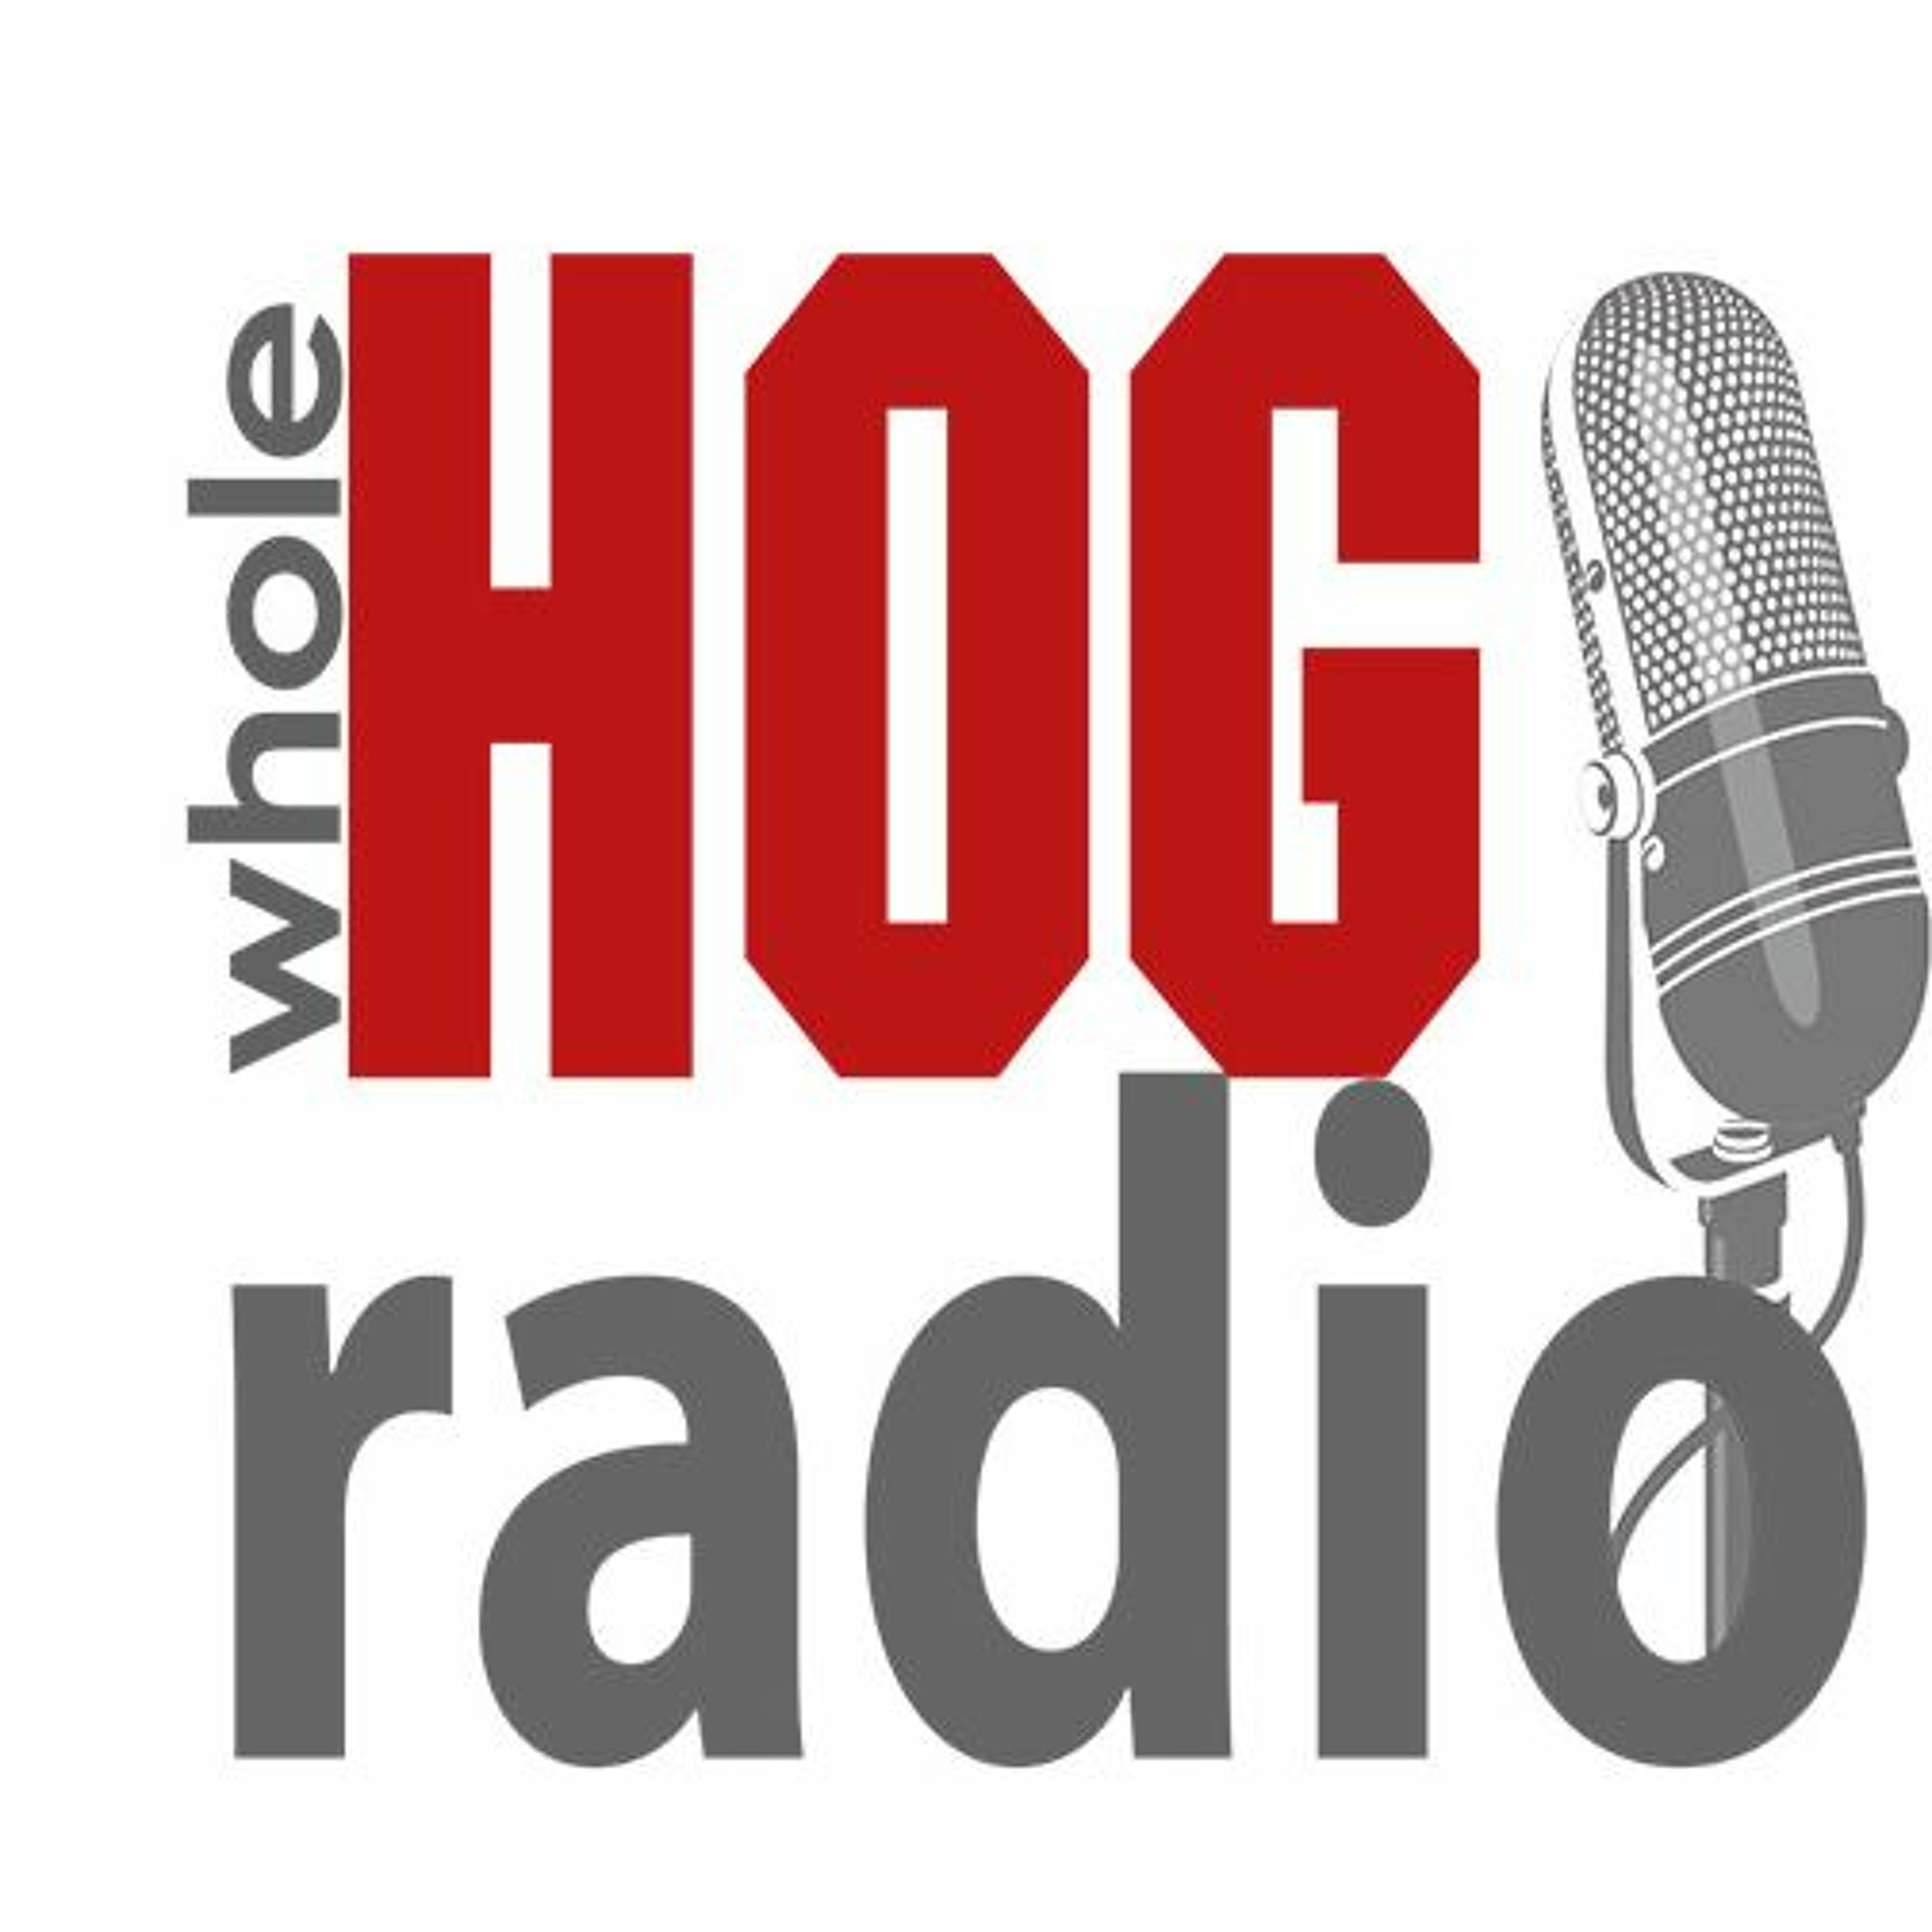 WholeHog Podcast: Best of the decade with Bob Holt